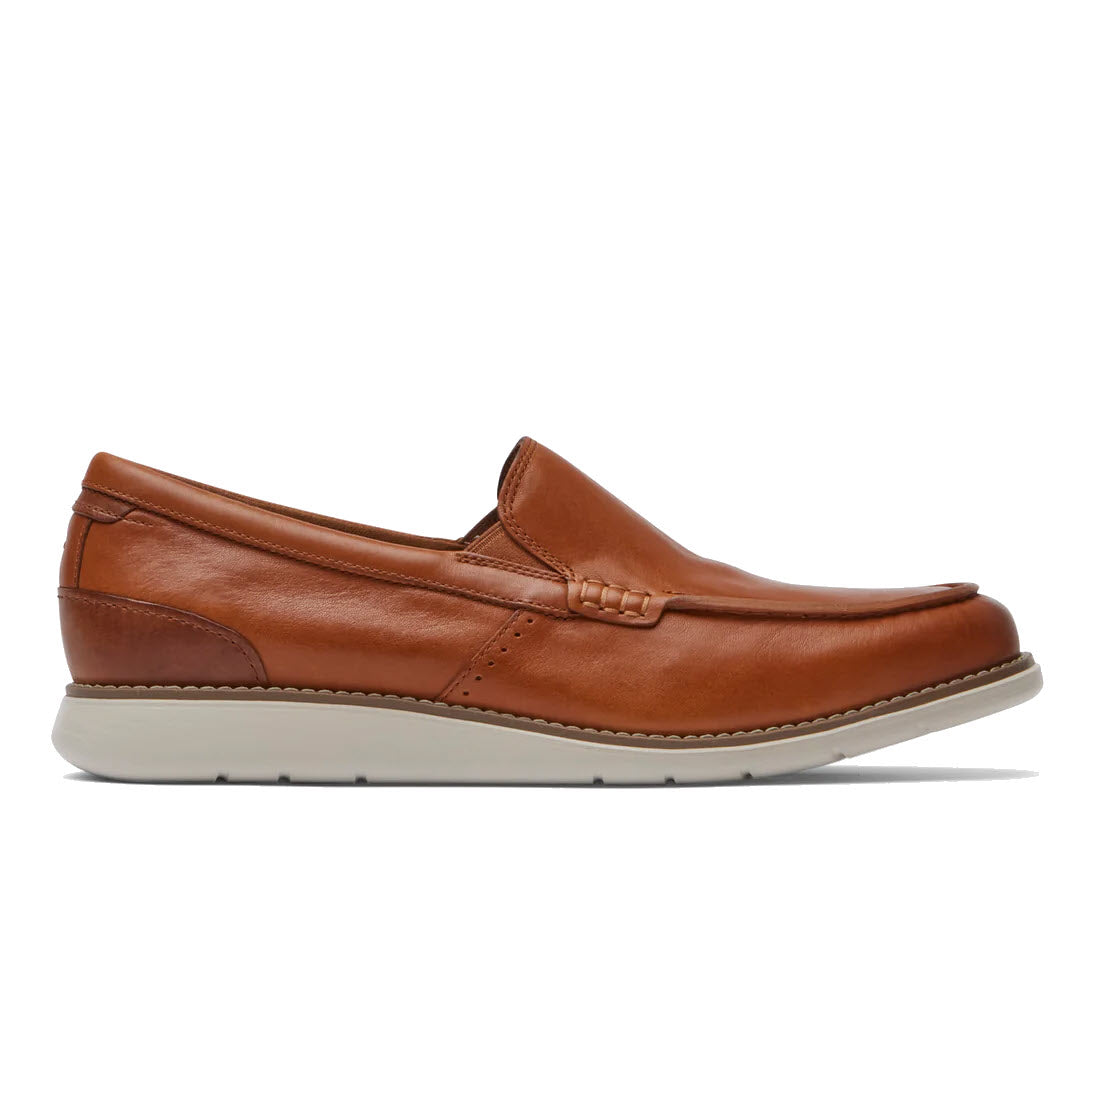 A Rockport Total Motion Craft Venetian Cognac loafer with a white sole, displayed against a plain white background.